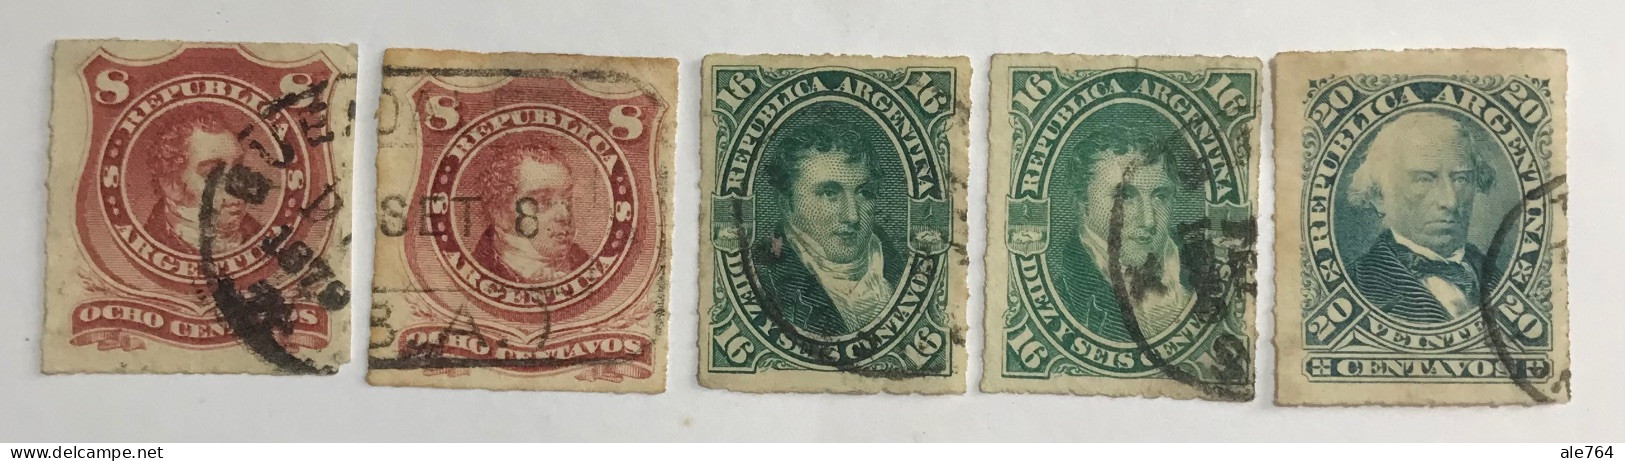 Argentina 1876/7, Rouletted, Rivadavia, Belgrano, Velez Sarfield, GJ 49/51, Scoot 35/7, Y 33/5, Used. - Usados